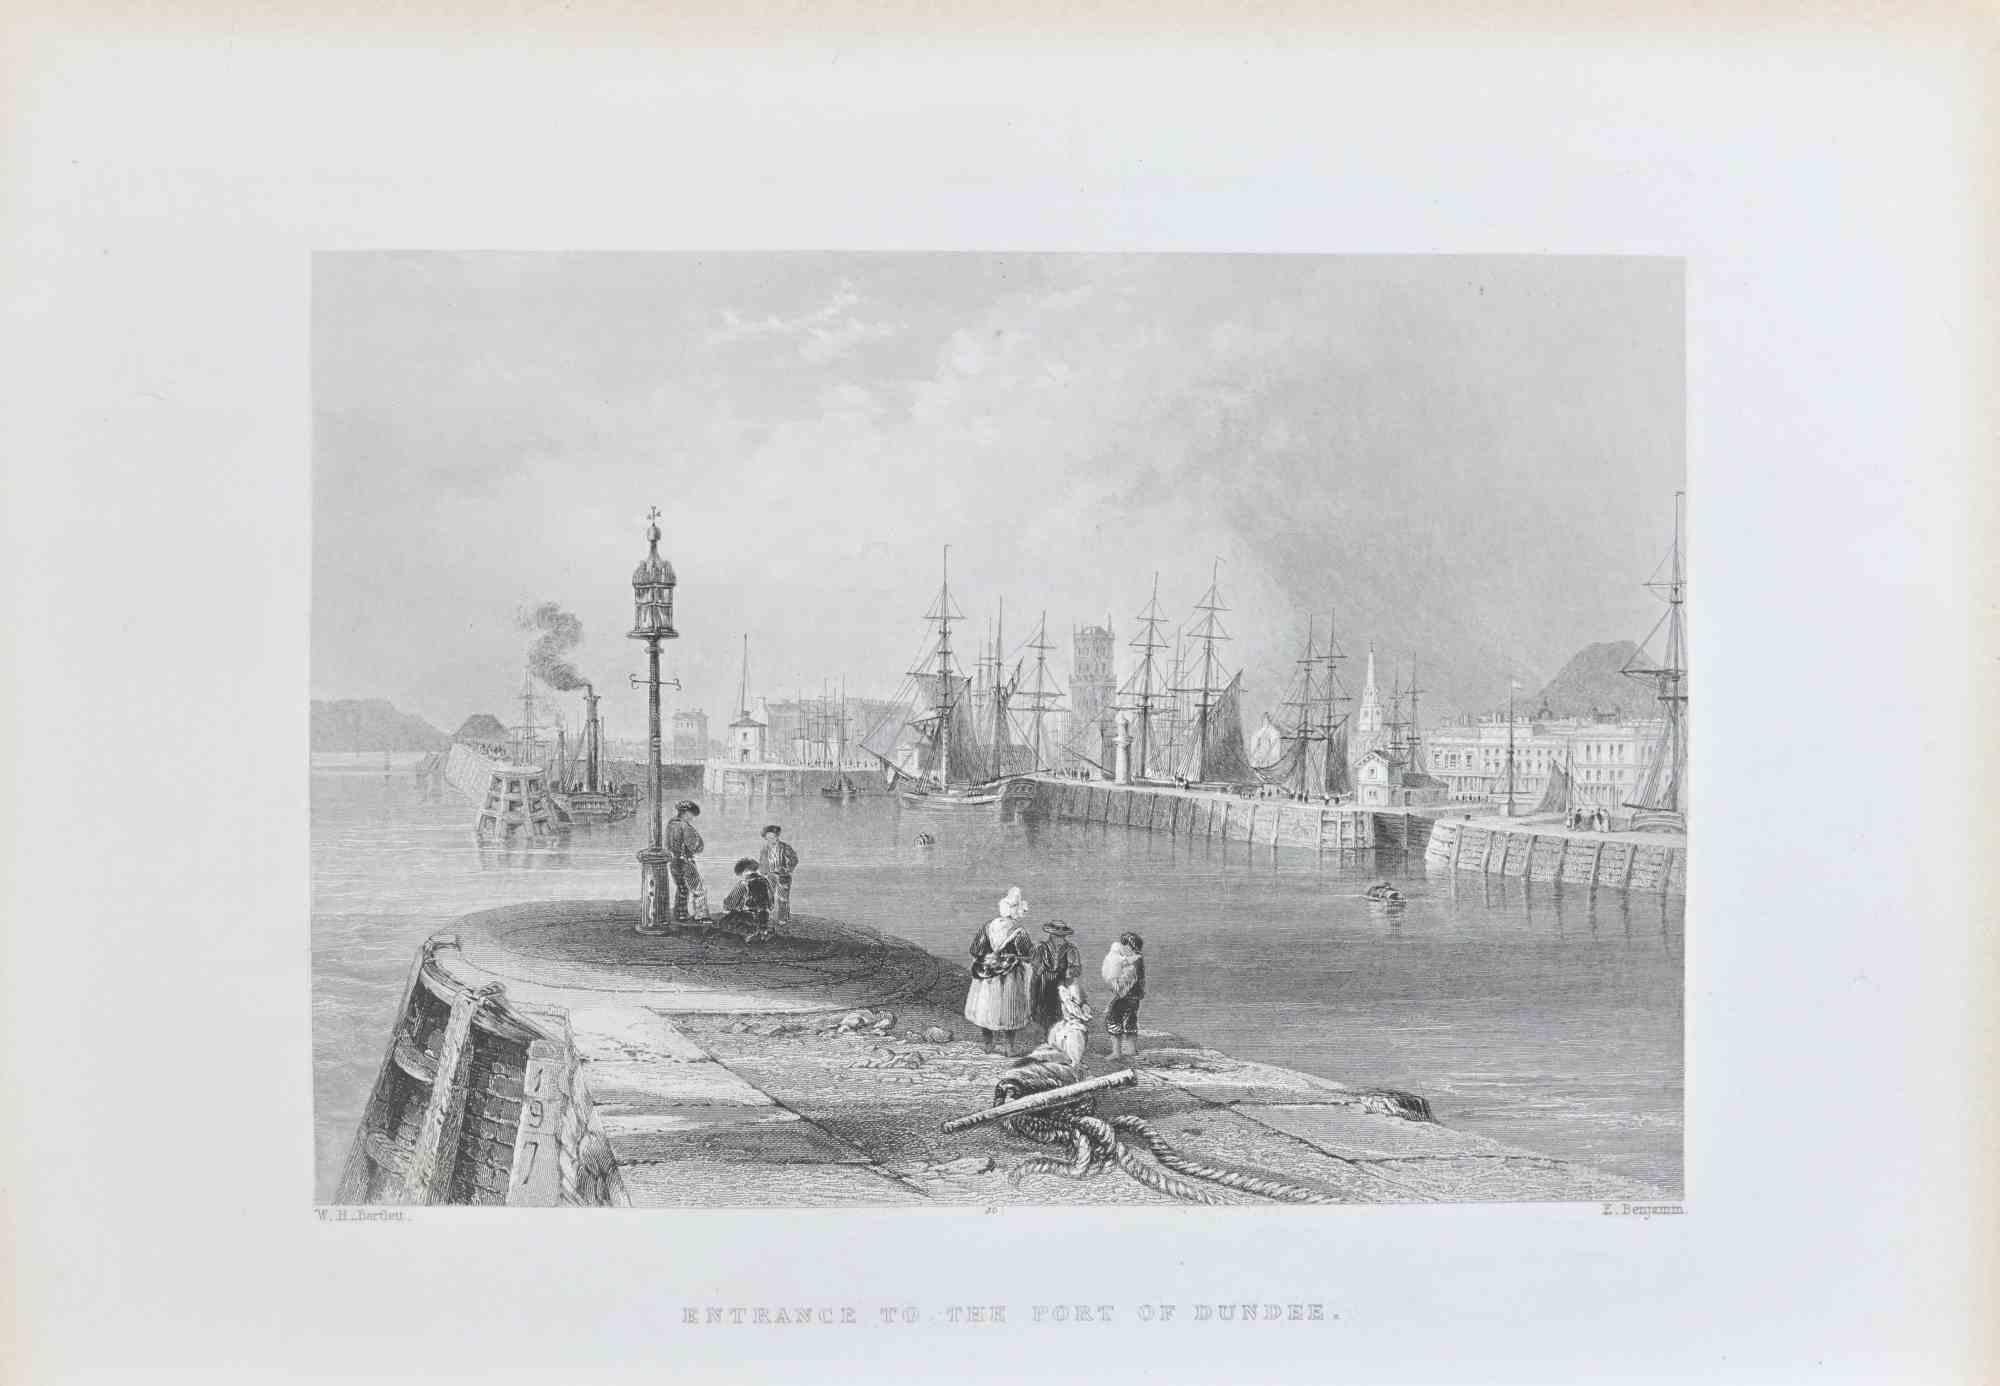 William Henry Bartlett  Figurative Print - Entrance to the Port of Dundee - Lithograph By W.H. Bartlett - 19th Century